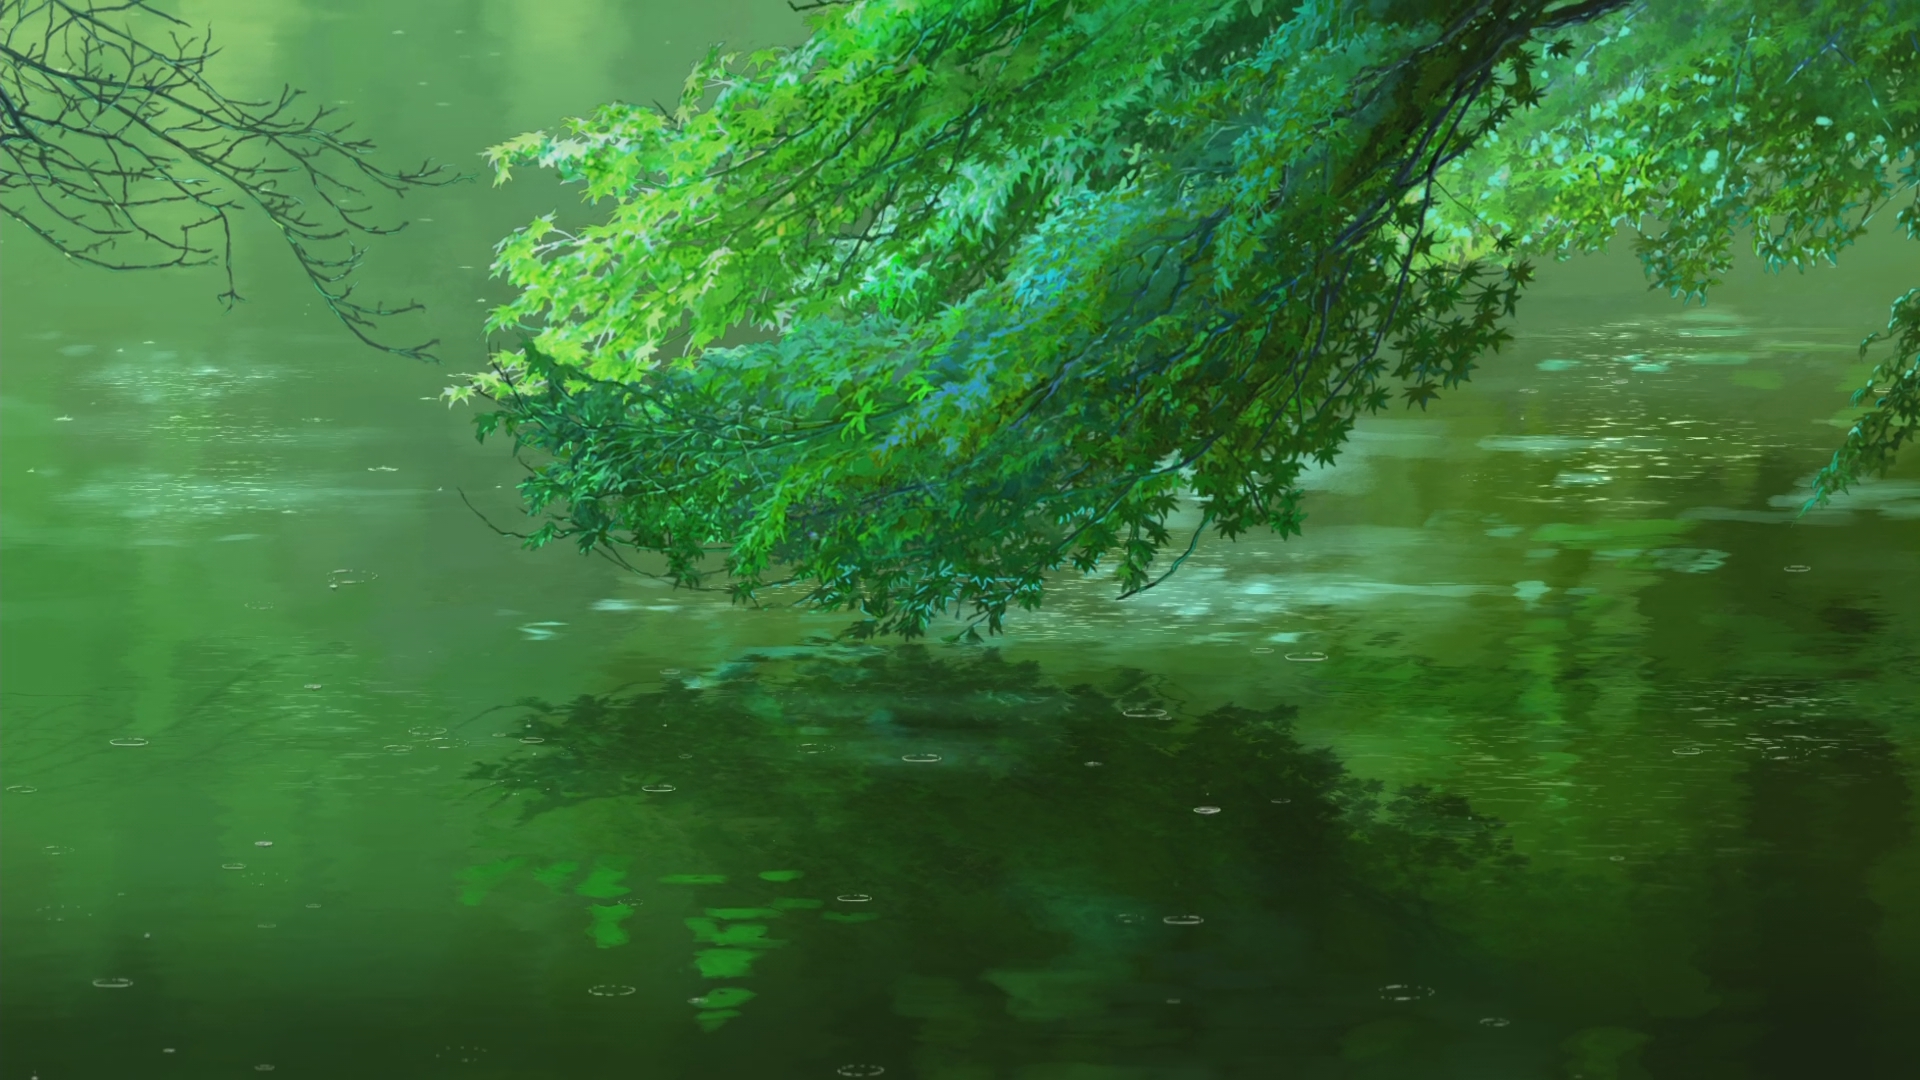 Desktop Wallpaper Anime Green Tree, Branches, Leaves, Reflections, Lake, HD Image, Picture, Background, Jqvf9g